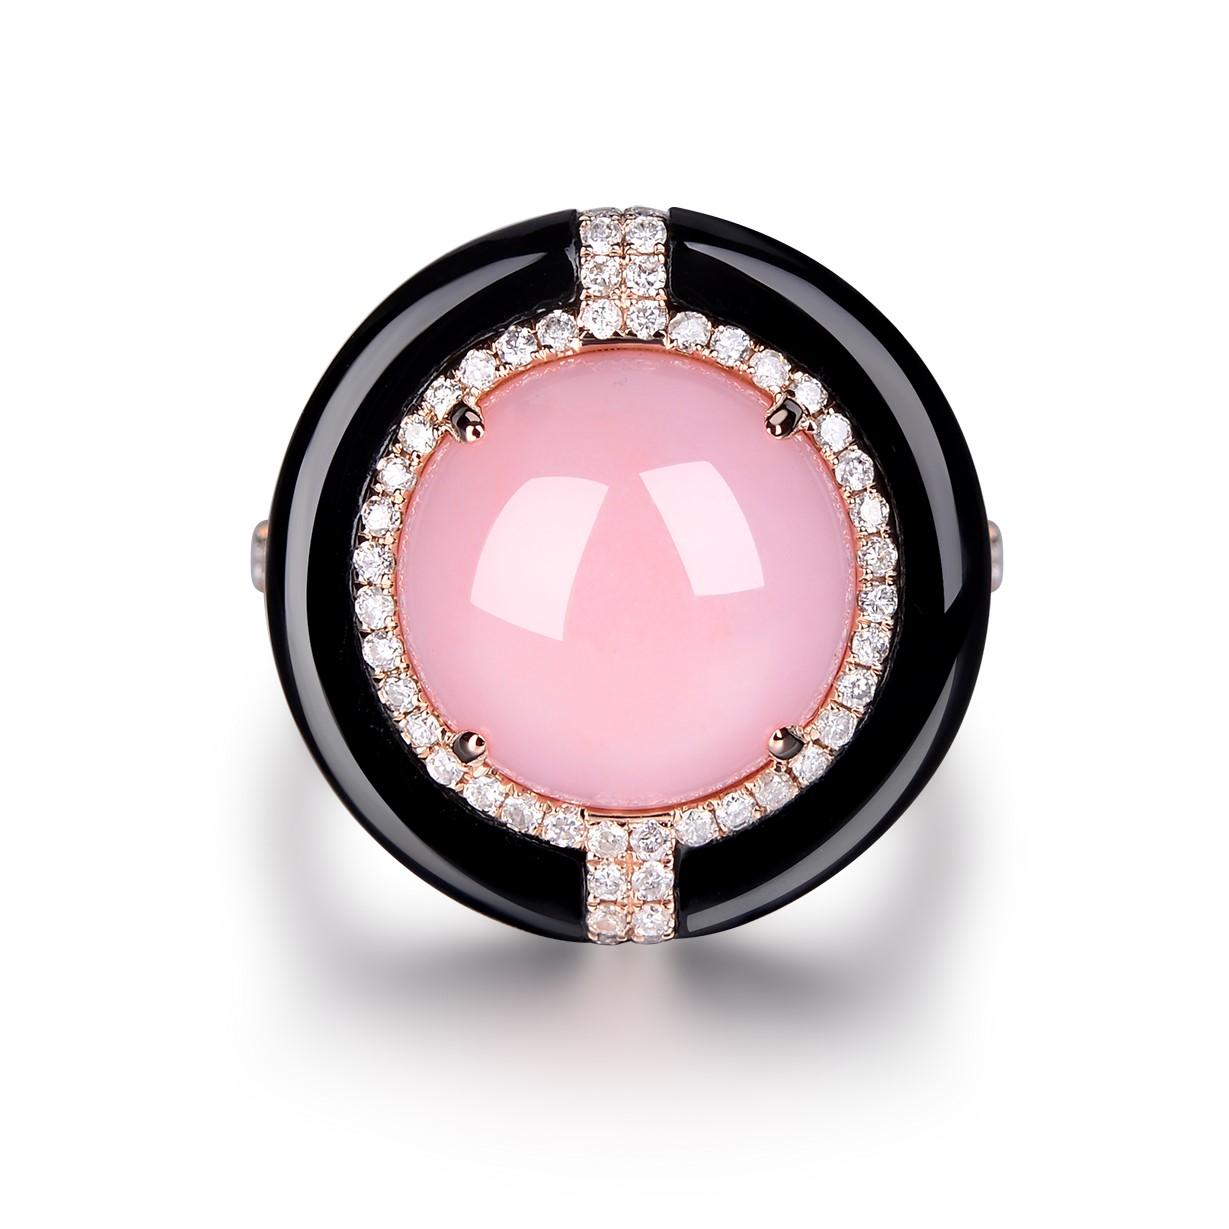 This ring featured 1 cabochon pink opal weight 5.09 carats. Pink opal is surrounded by a diamond halo. Onyx are handcrafted to fit into the mounting. Earrings are set in 14 karat rose gold. Matching ring is available, please visit our storefront or